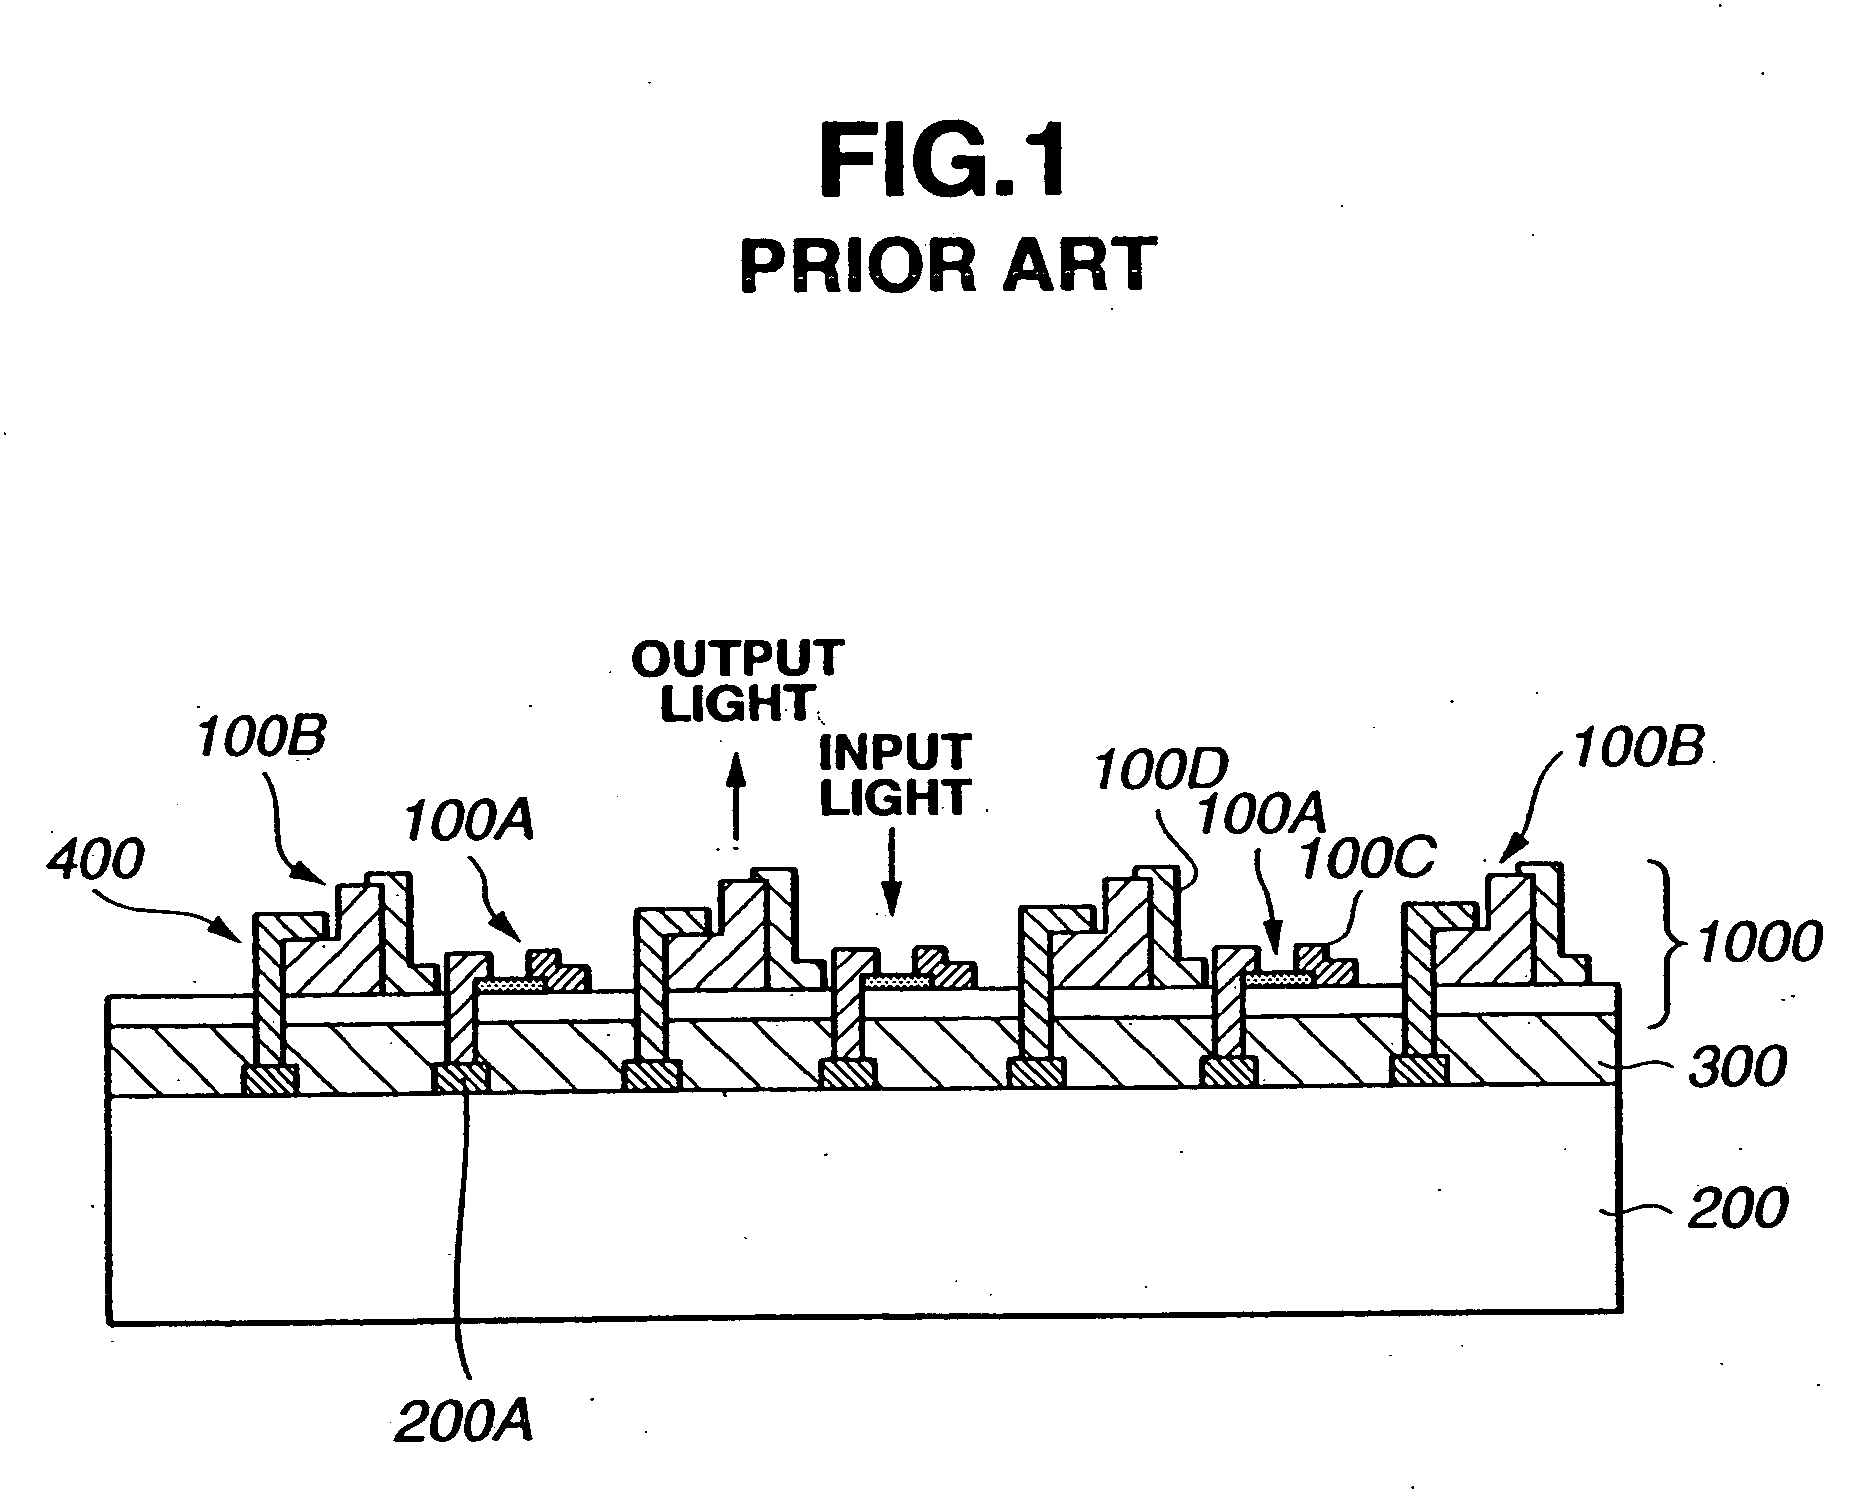 Surface optical device apparatus, method of fabricating the same, and apparatus using the same